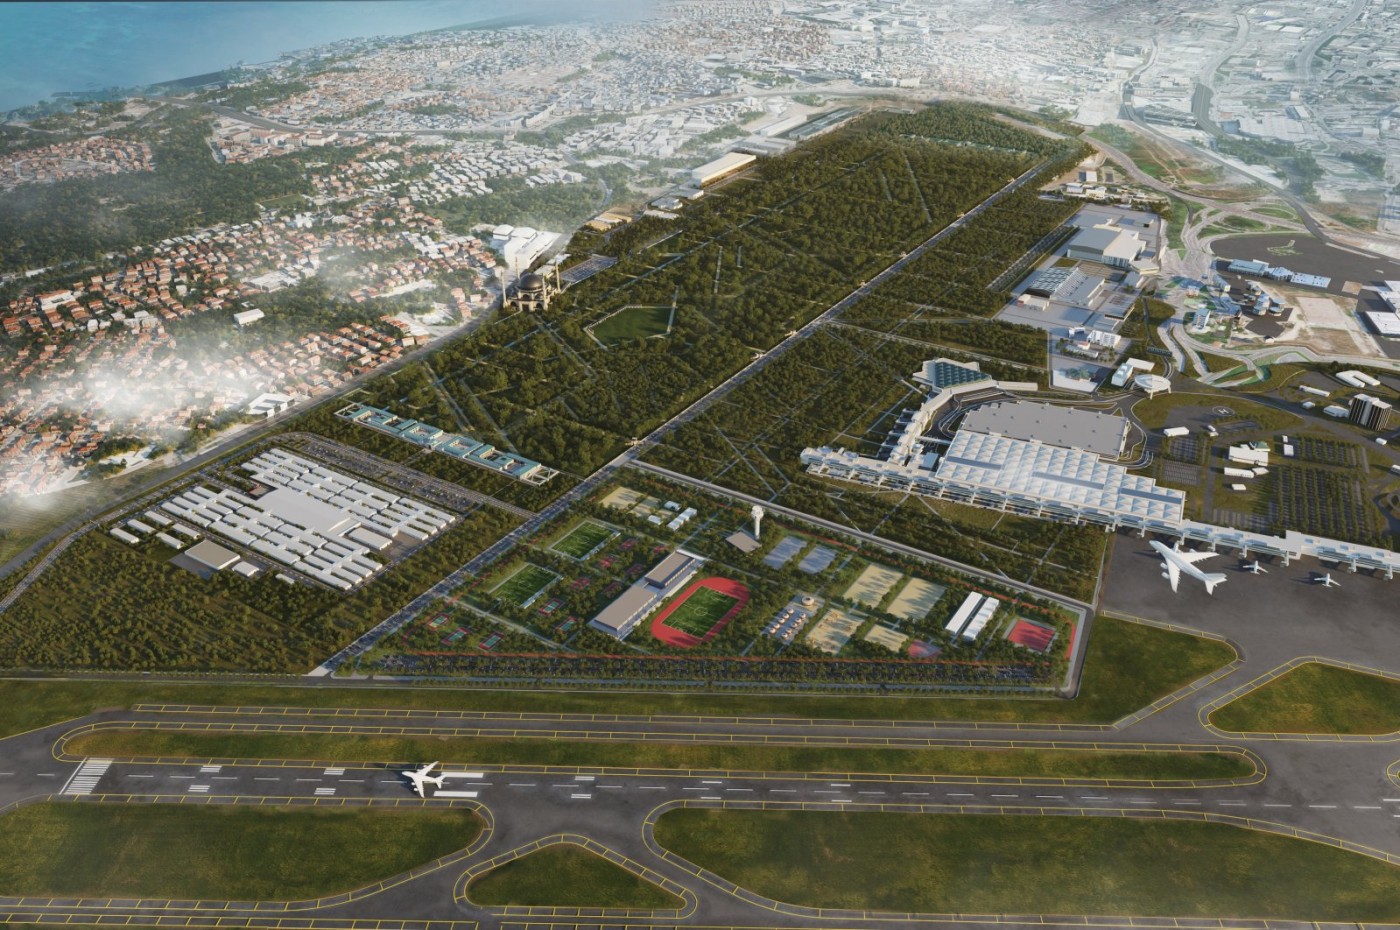 Transforming Ataturk Airport into the nation's largest park in Turkey